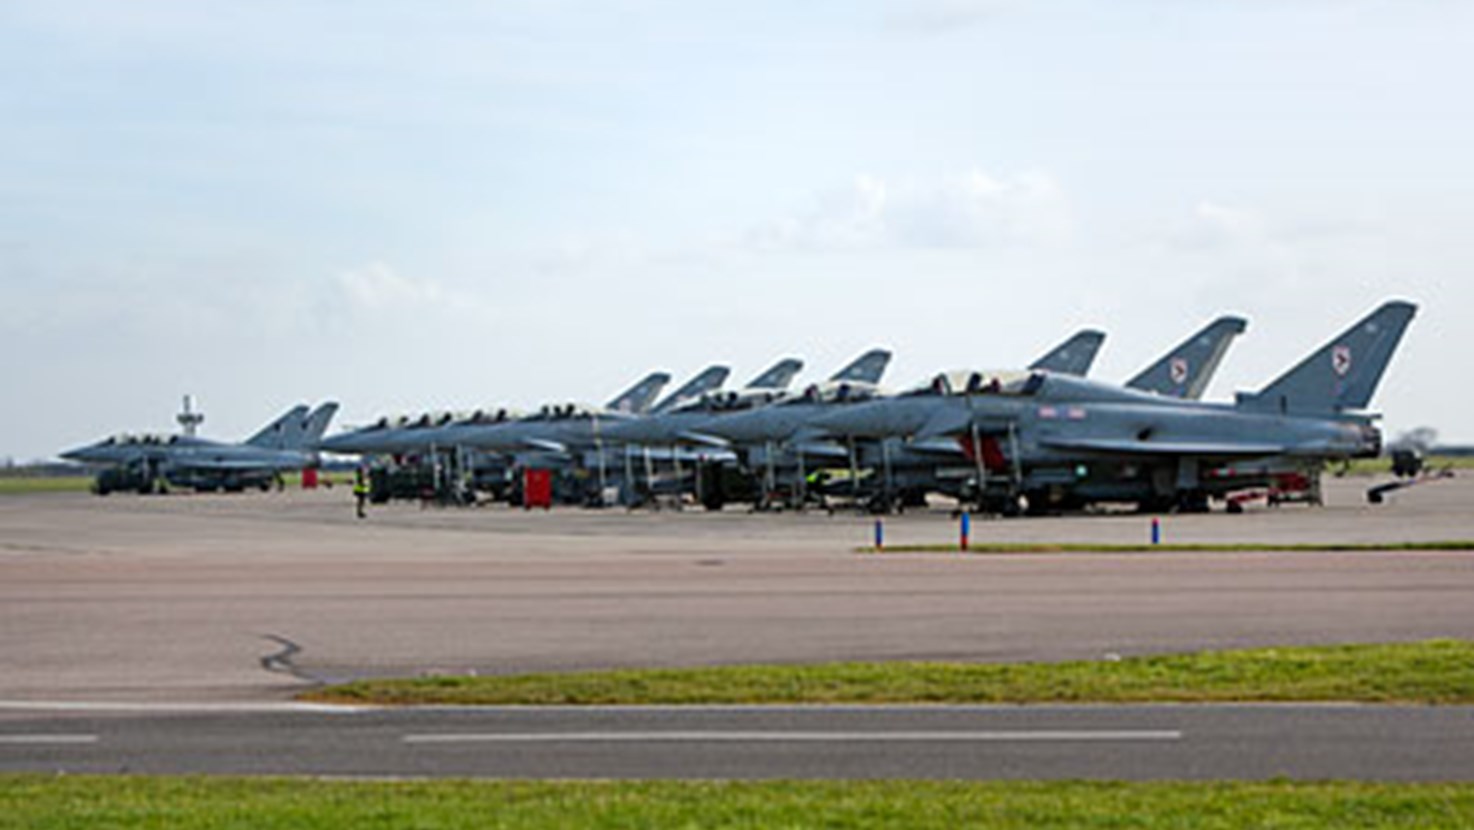 View all of the events and meetings that PCC Marc Jones attended or hosted at RAF Coningsby in 2022